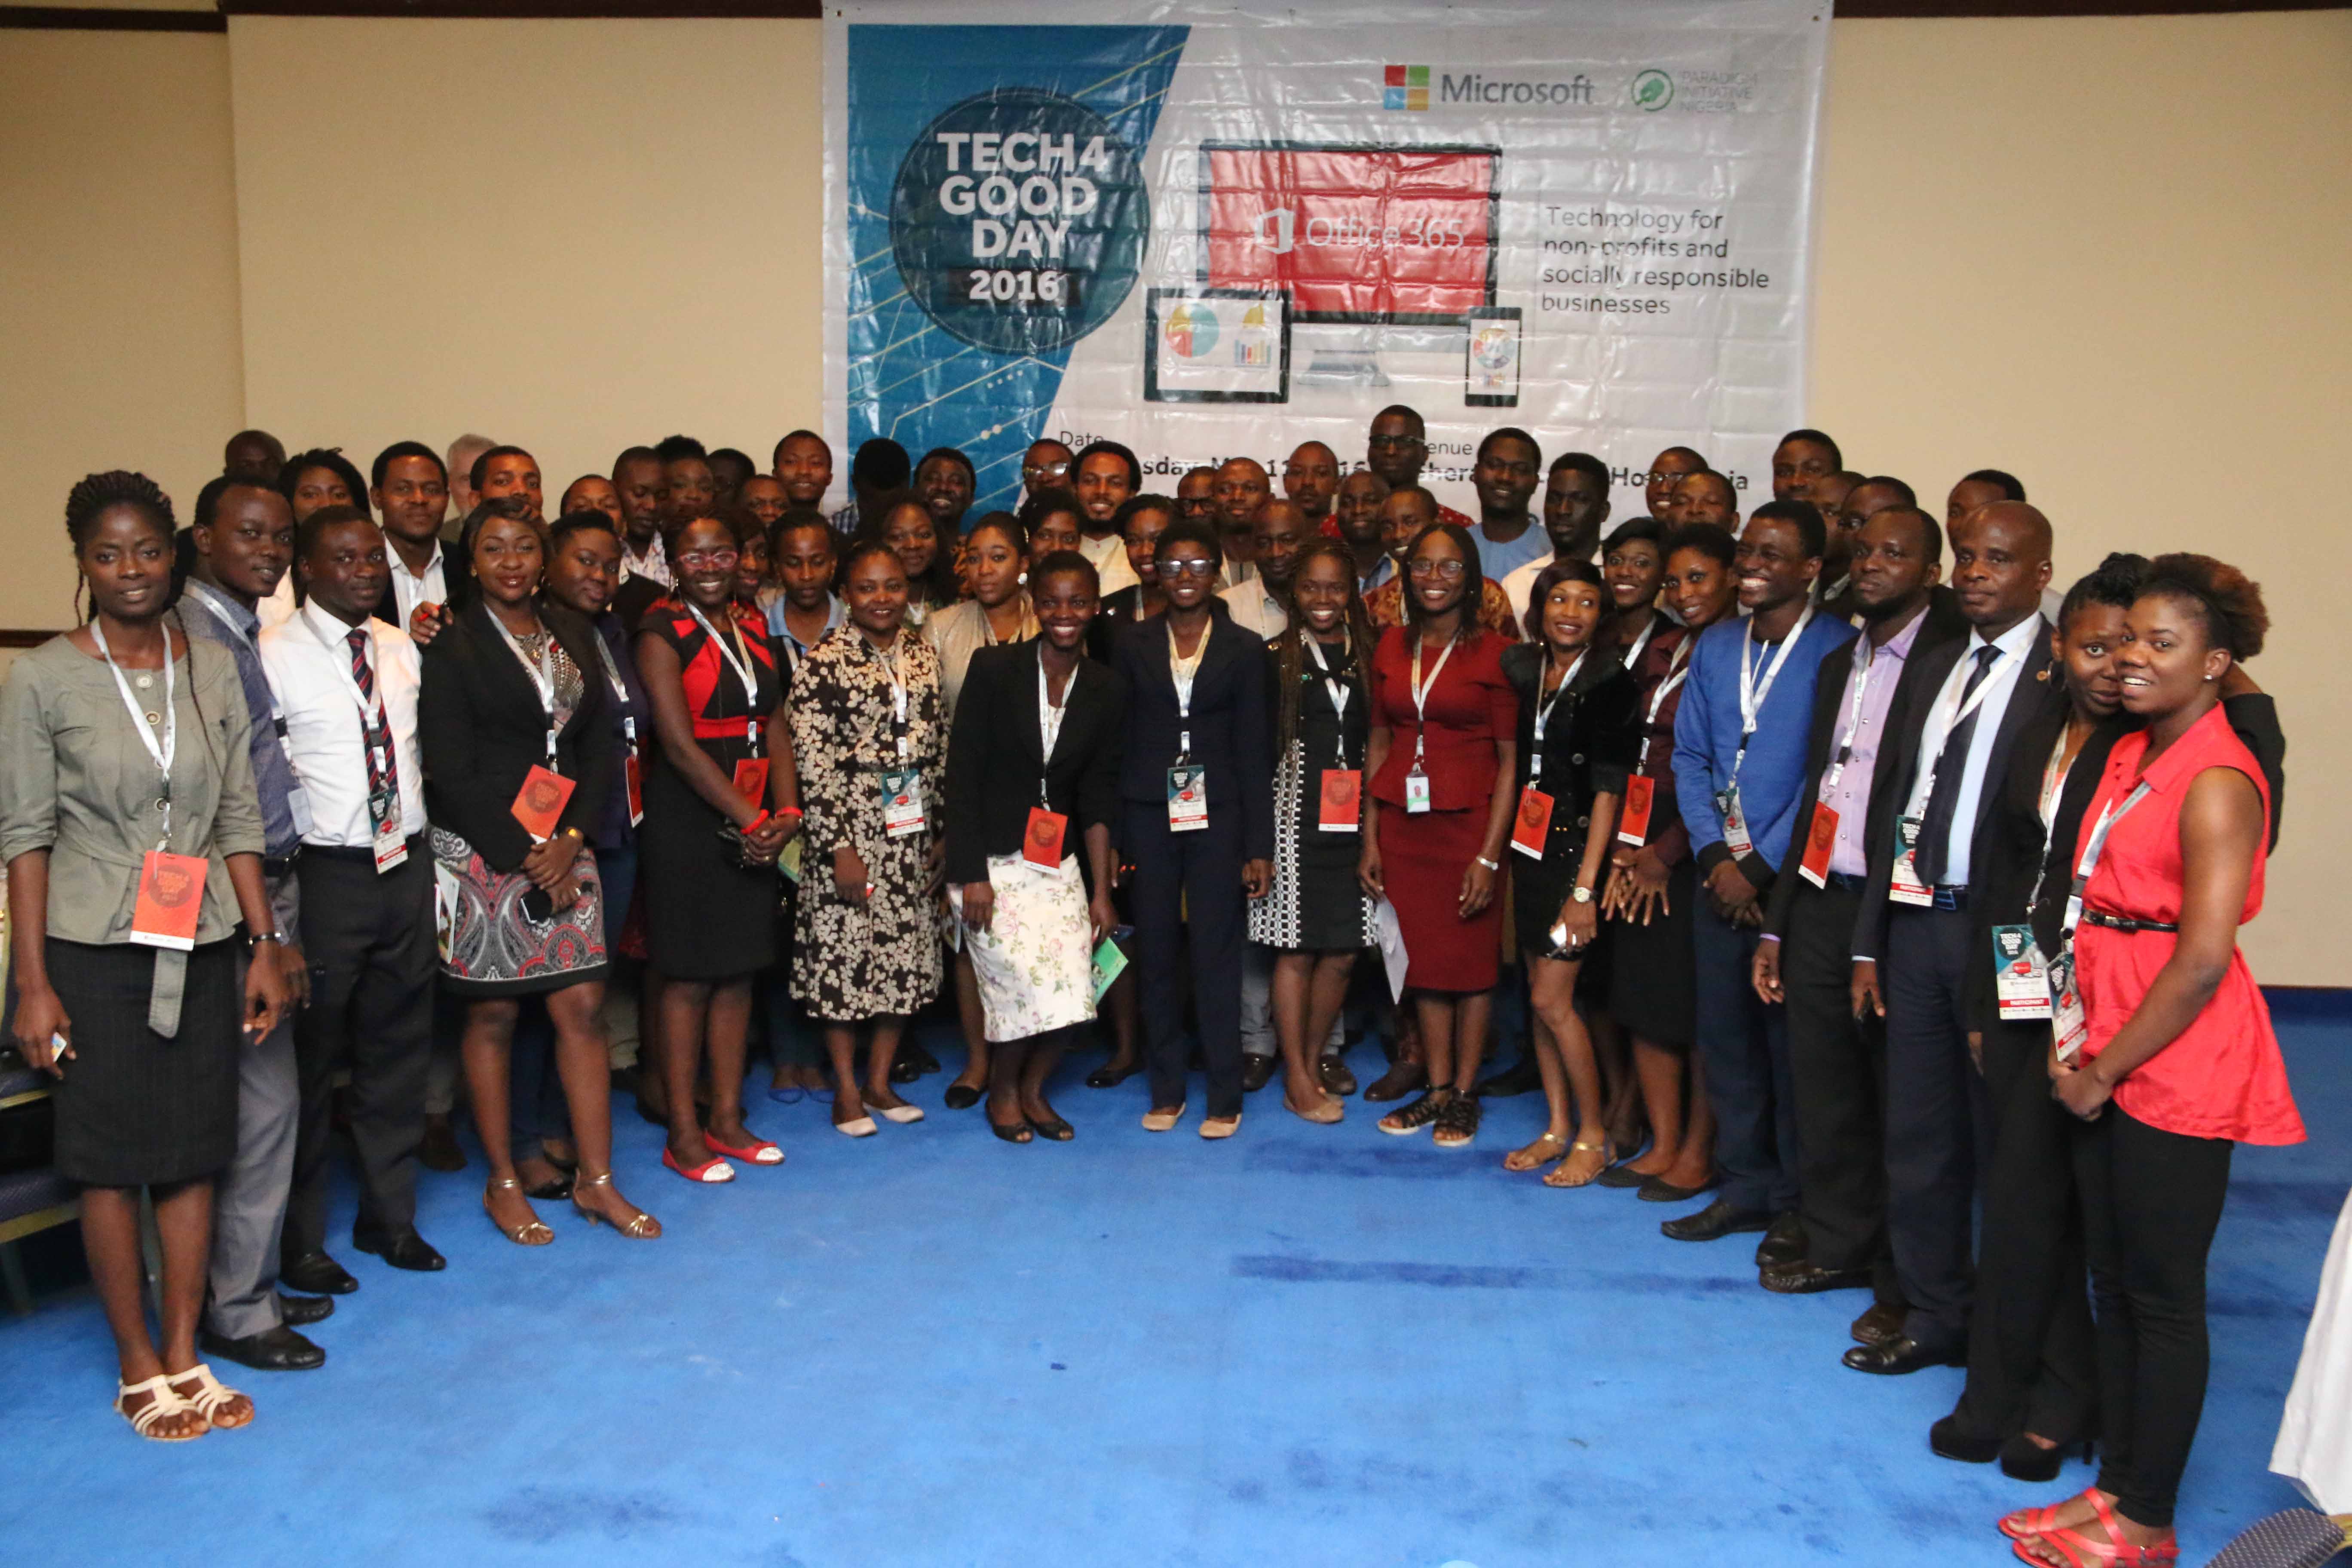 Cross section of attendees at the Microsoft Nigeria Tech4Good event held today at the Sheraton Hotels, Ikeja, Lagos